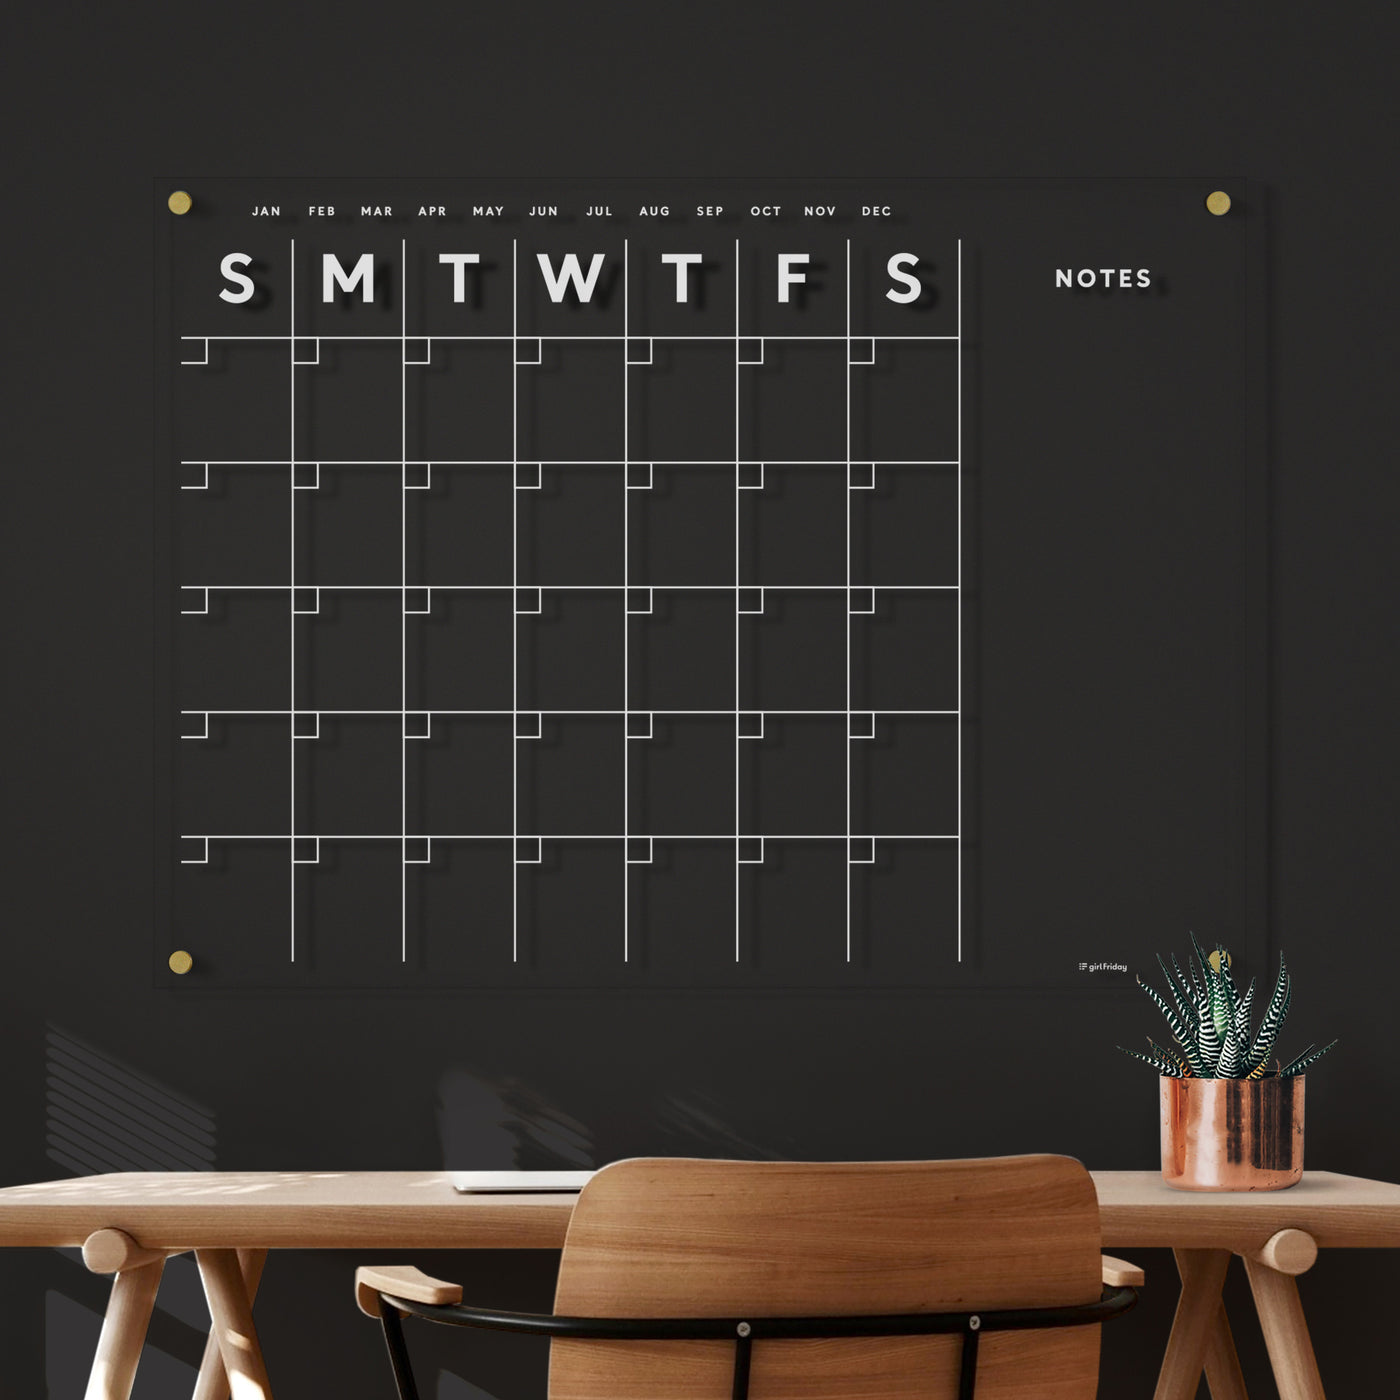 Acrylic Calendar with side notes - White text